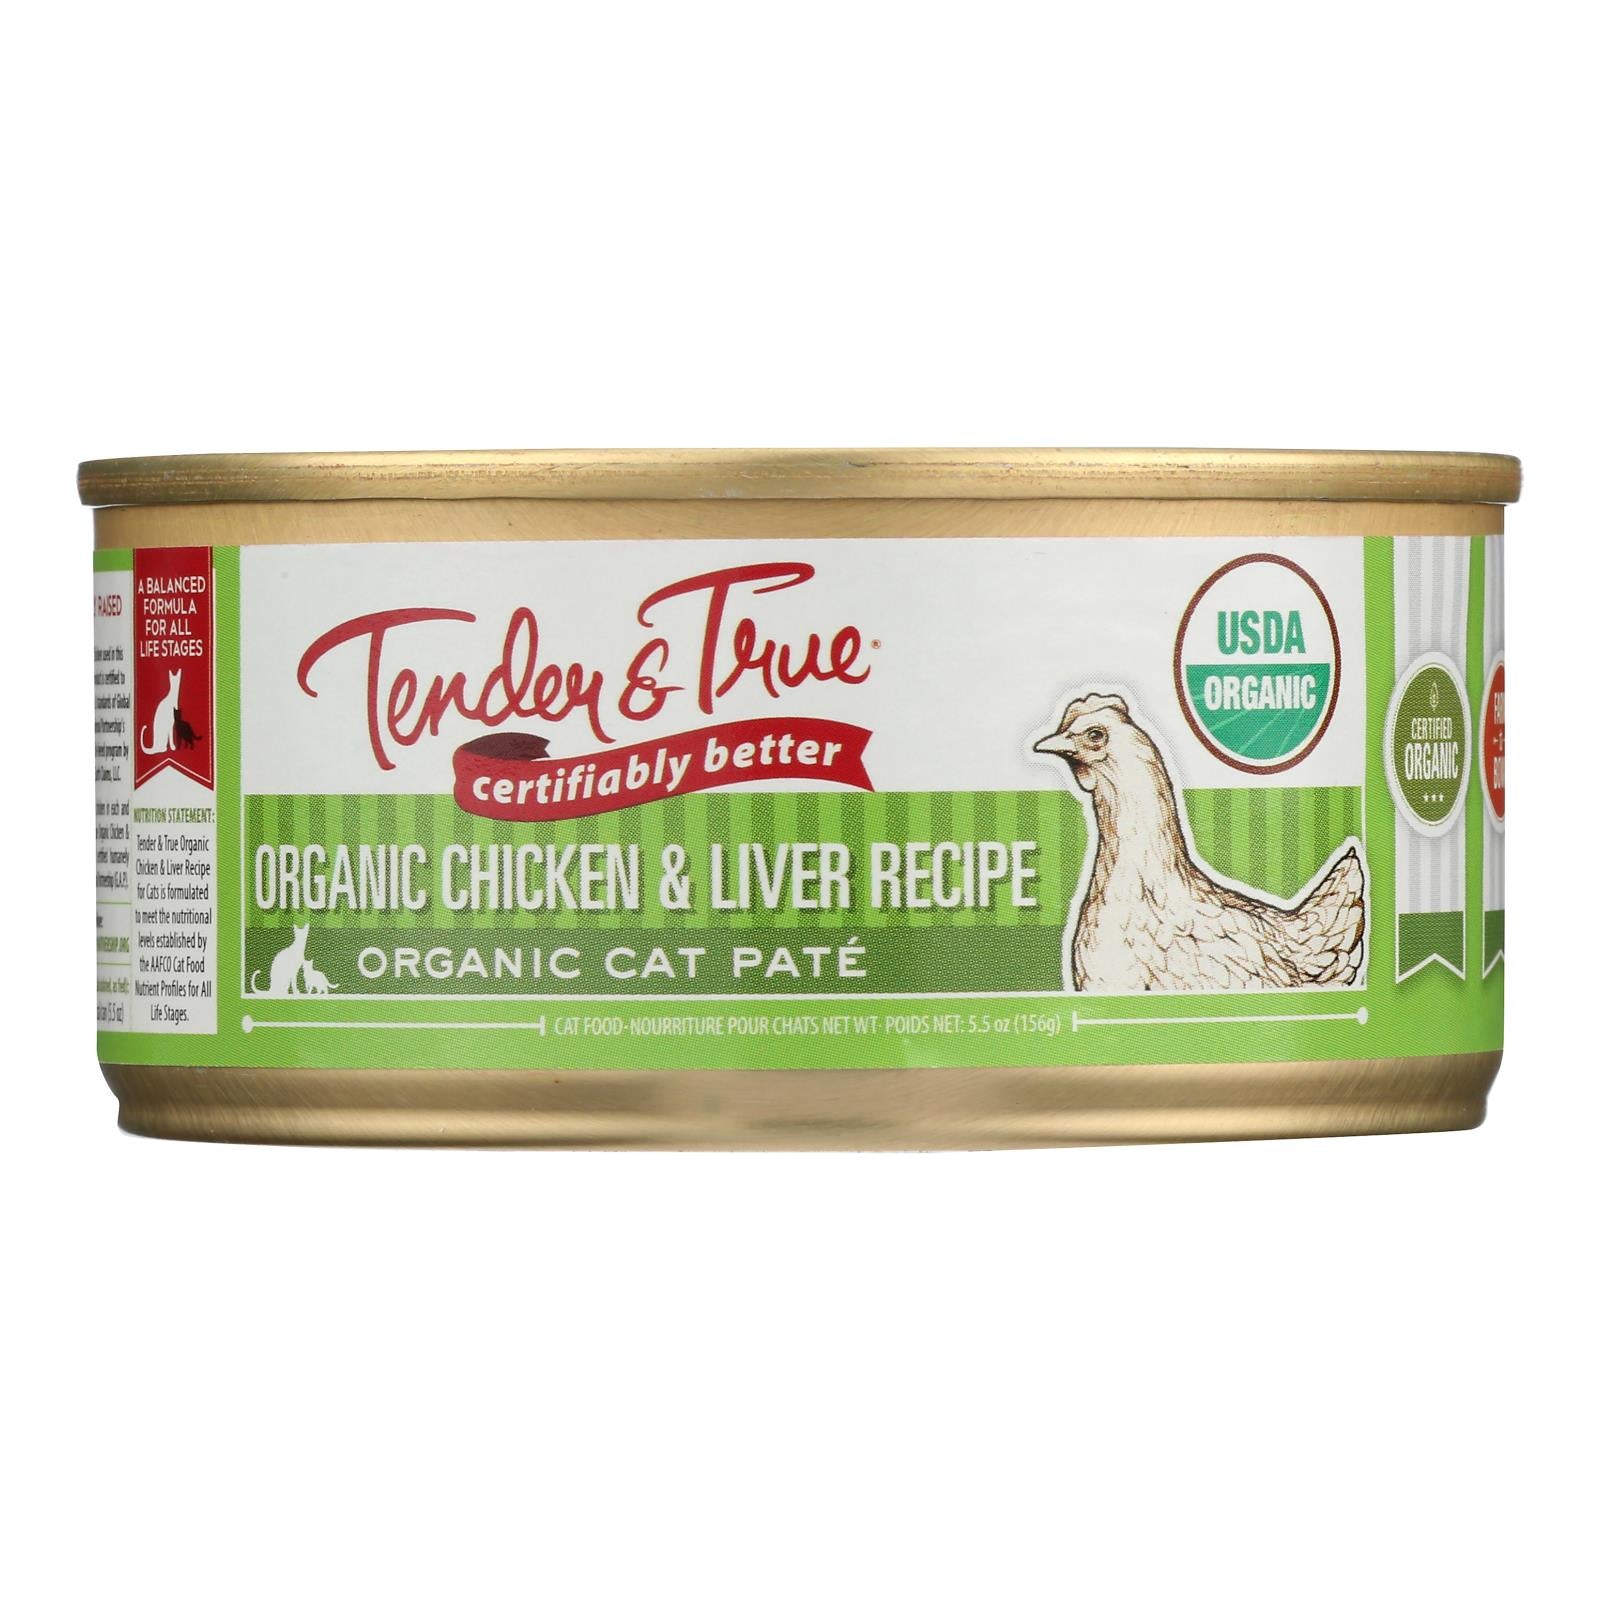 Tender & True Cat Food, Chicken And Liver - Case Of 24 - 5.5 Oz